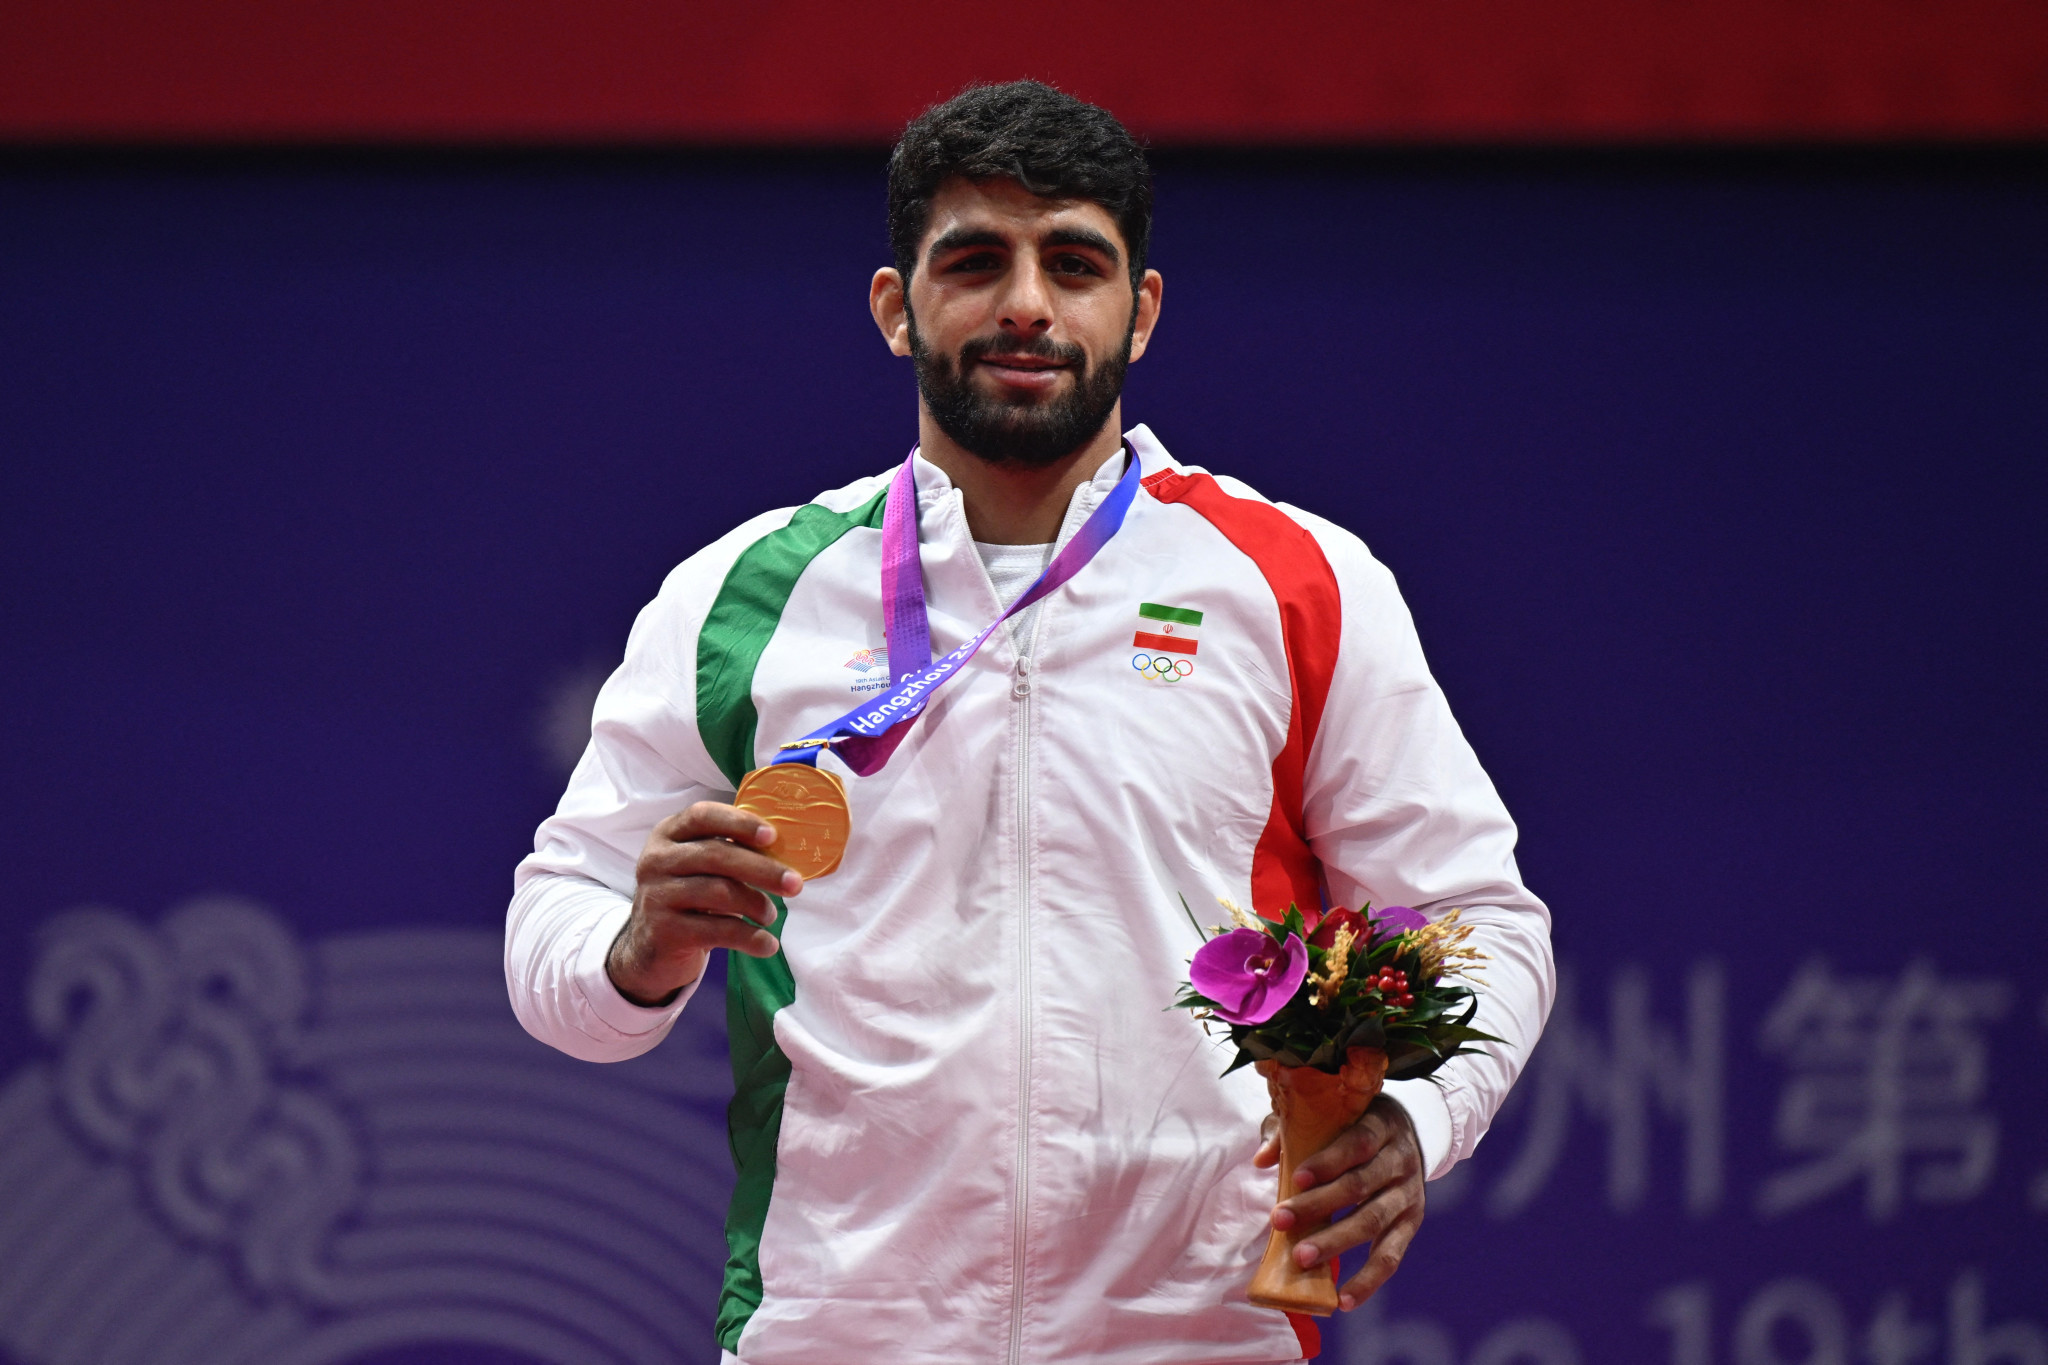 Olympic bronze medallist Mohammad Hadi Saravi bagged his first Asian Games title in the men's Greco-Roman 97kg wrestling tournament ©Getty Images